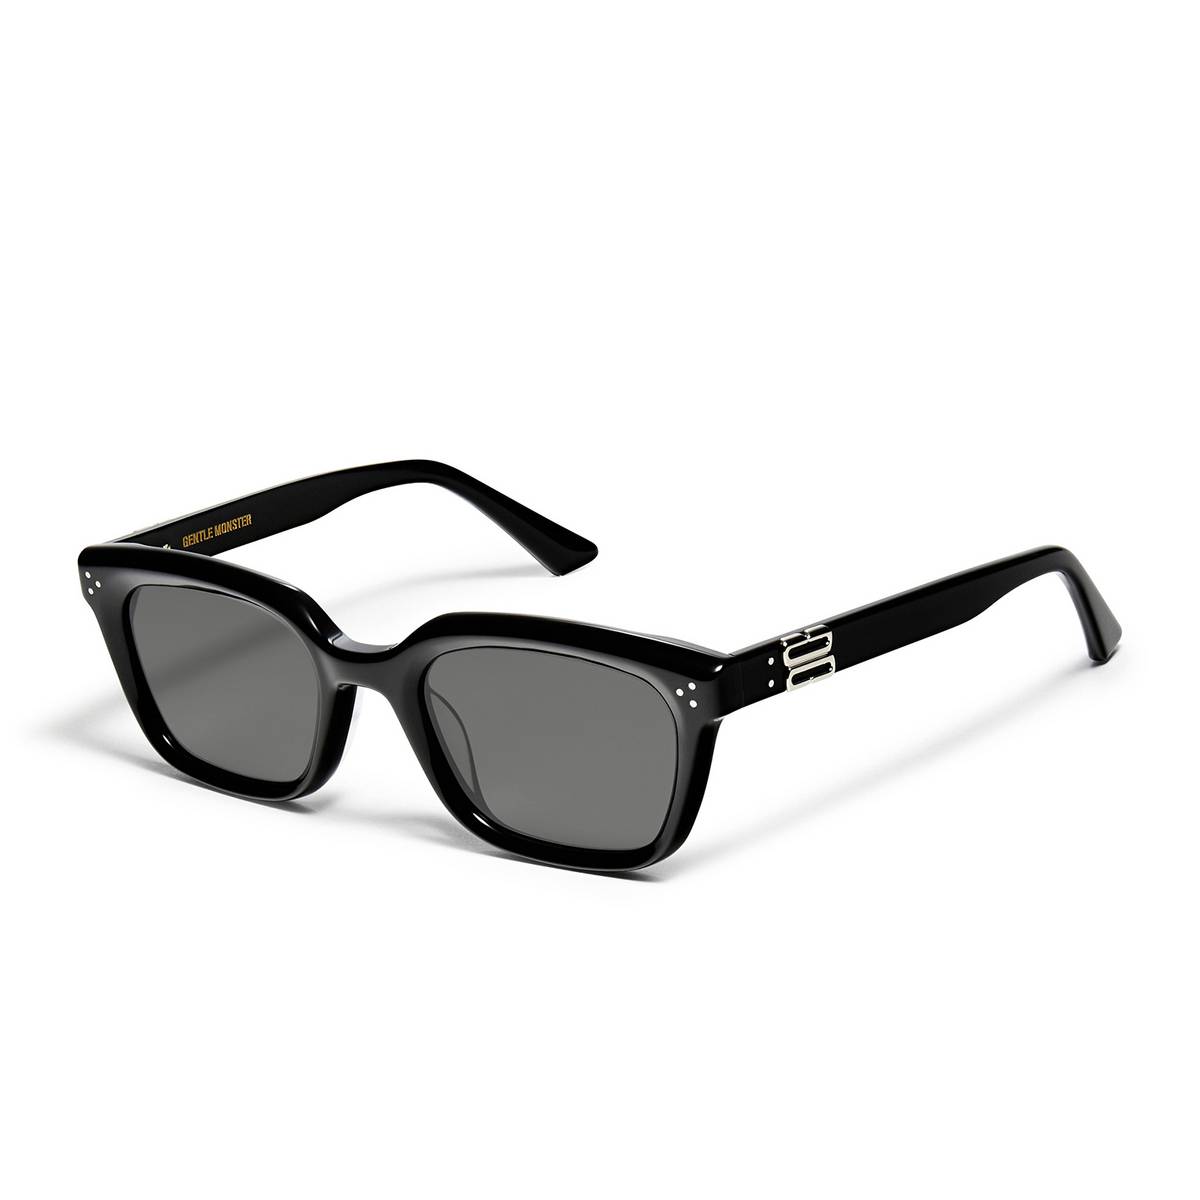 Gentle Monster MUSEE Sunglasses 01 Black - three-quarters view